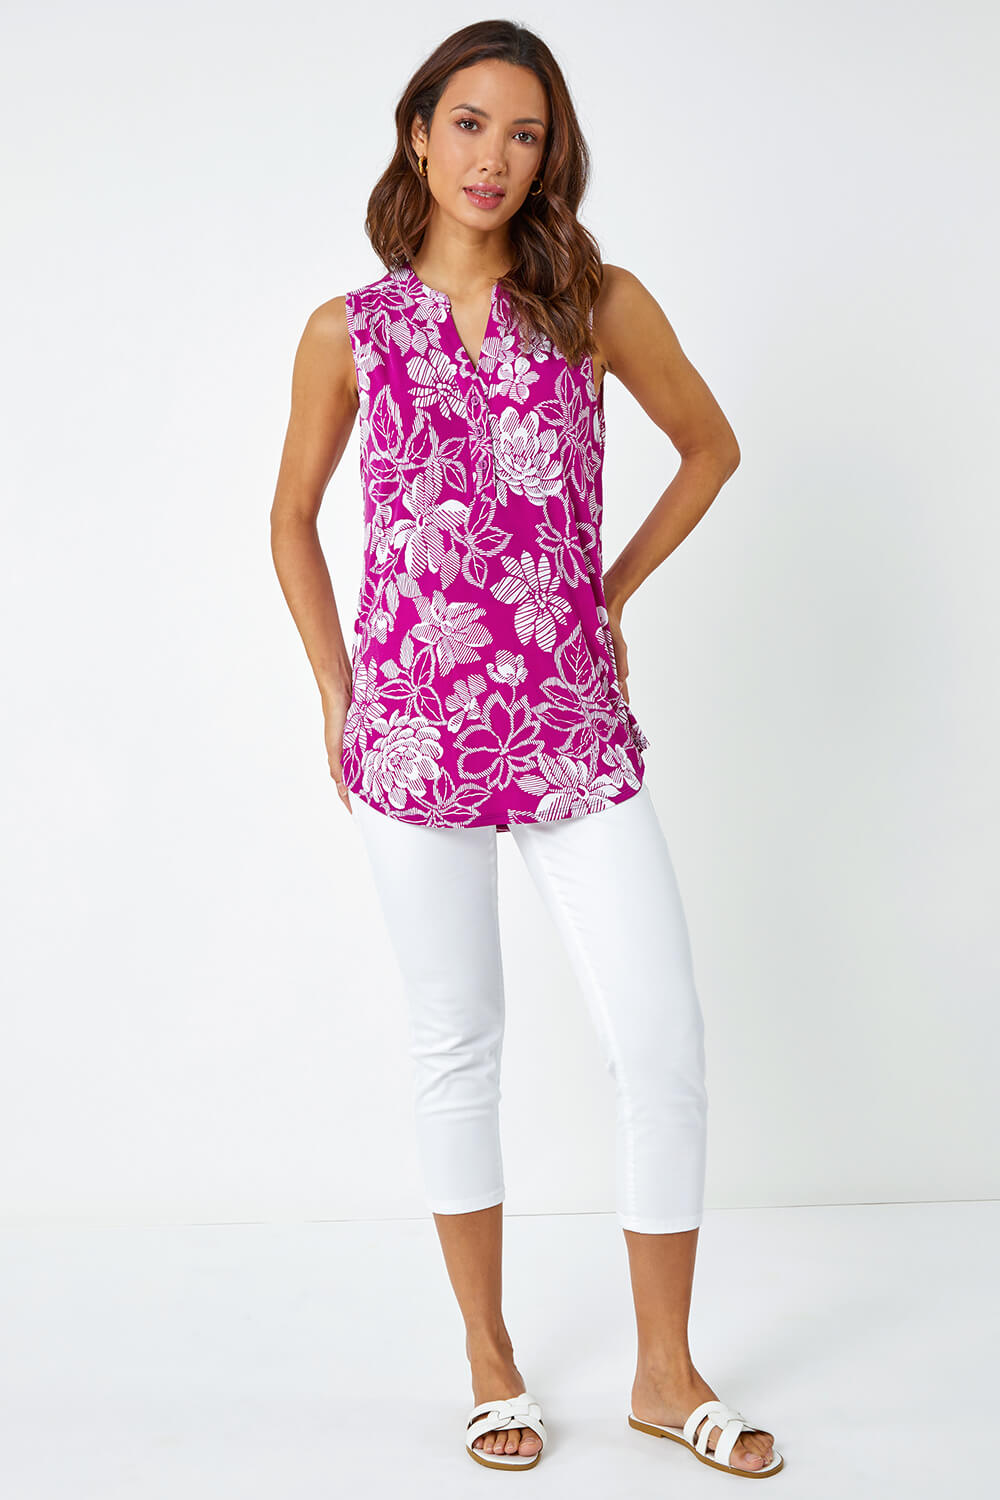 Natural Reflections® Women's Floral Print Lounge Tank Top